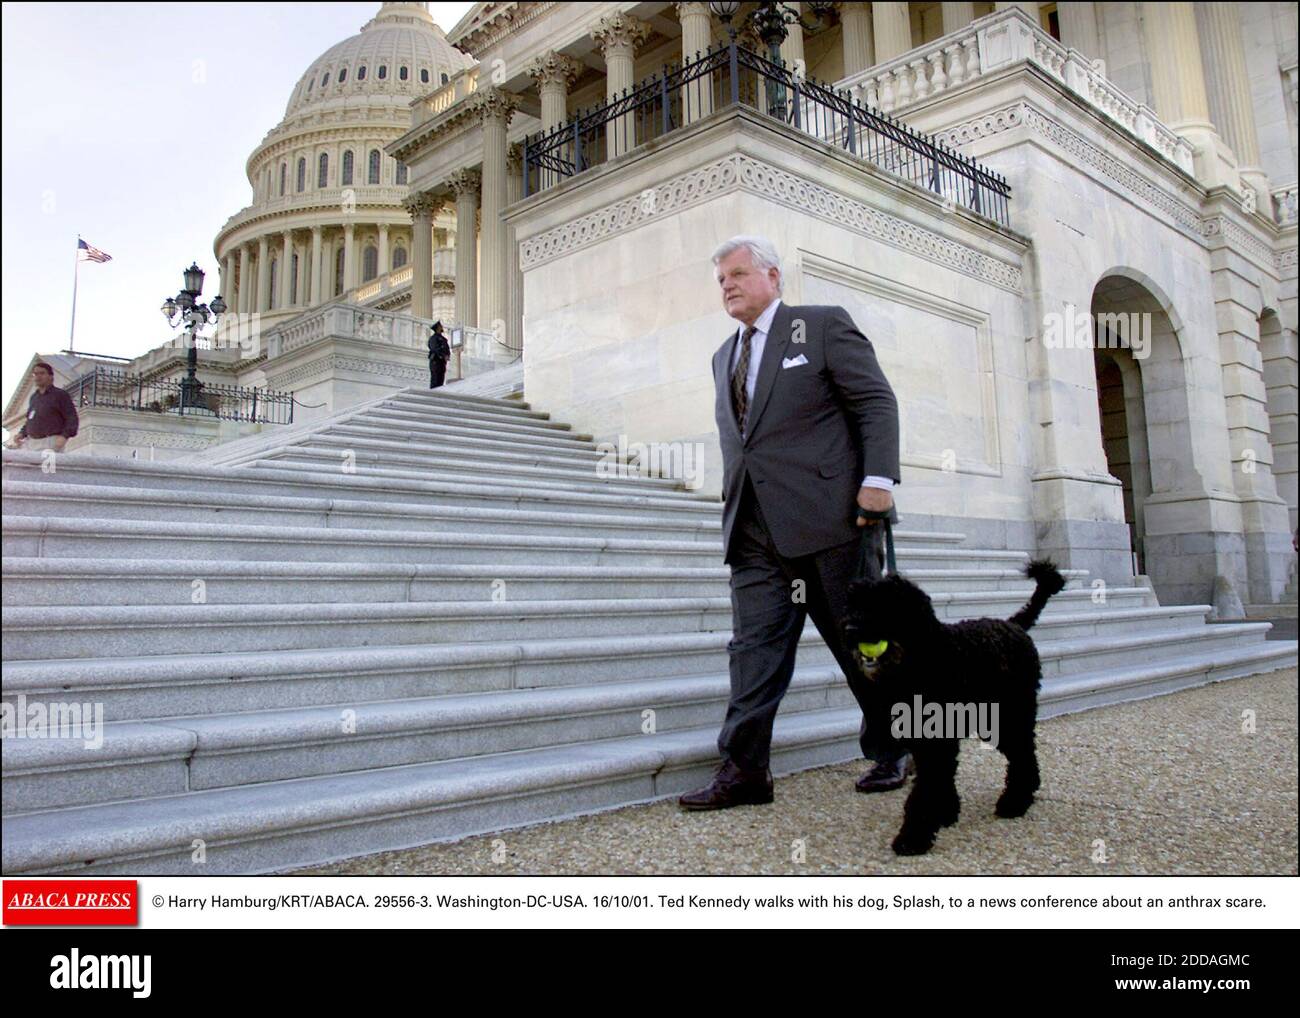 NO FILM, NO VIDEO, NO TV, NO DOCUMENTARY - © Harry Hamburg/KRT/ABACA. 29556-3. Washington-DC-USA. 16/10/01. Ted Kennedy walks with his dog, Splash, to a news conference about an anthrax scare. Stock Photo